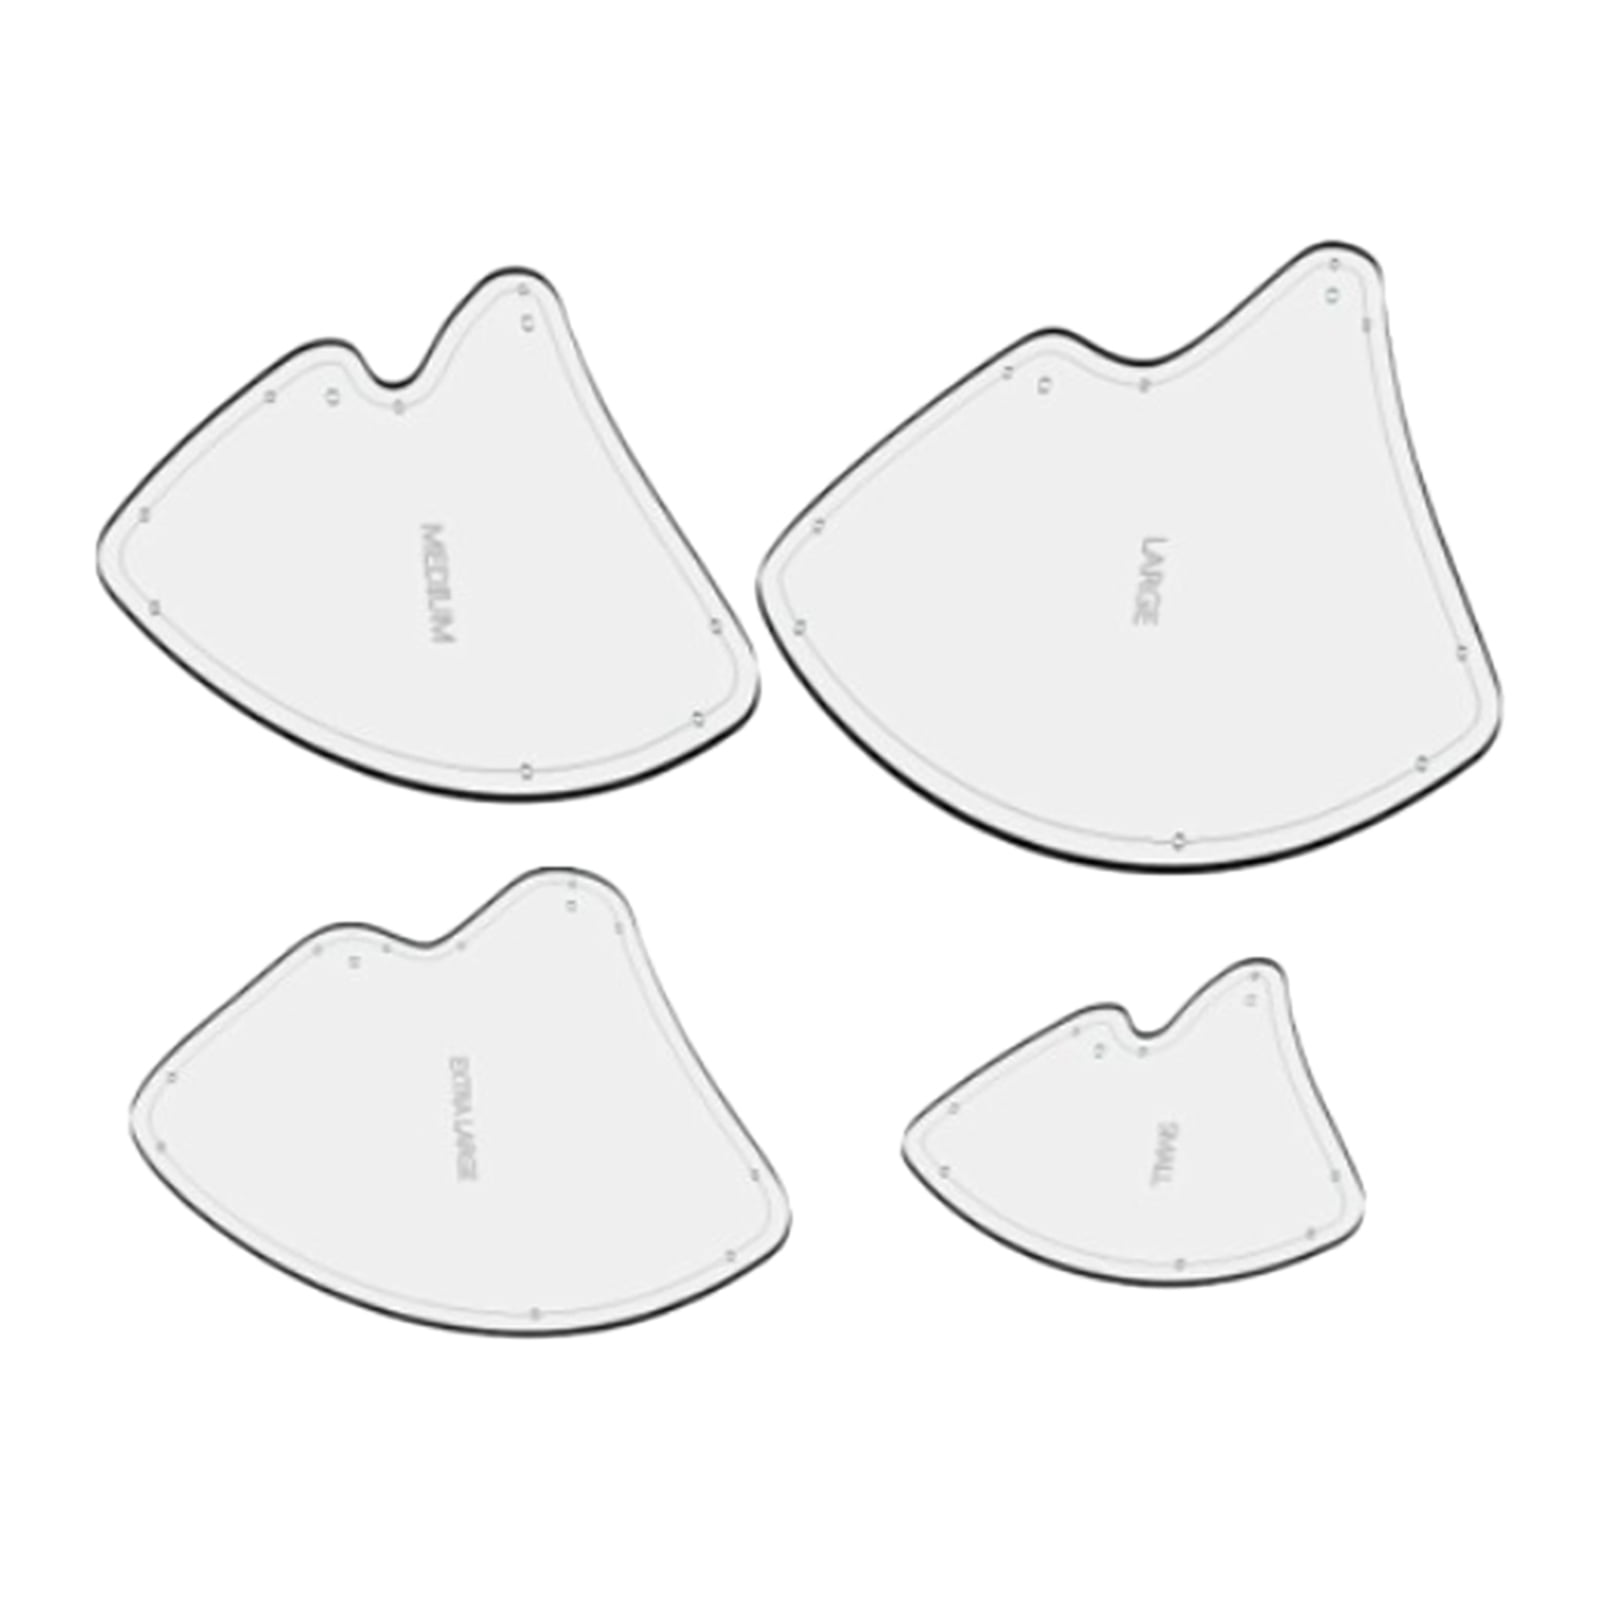 sewing-template-clear-acrylic-sewing-template-masks-patterns-walmart